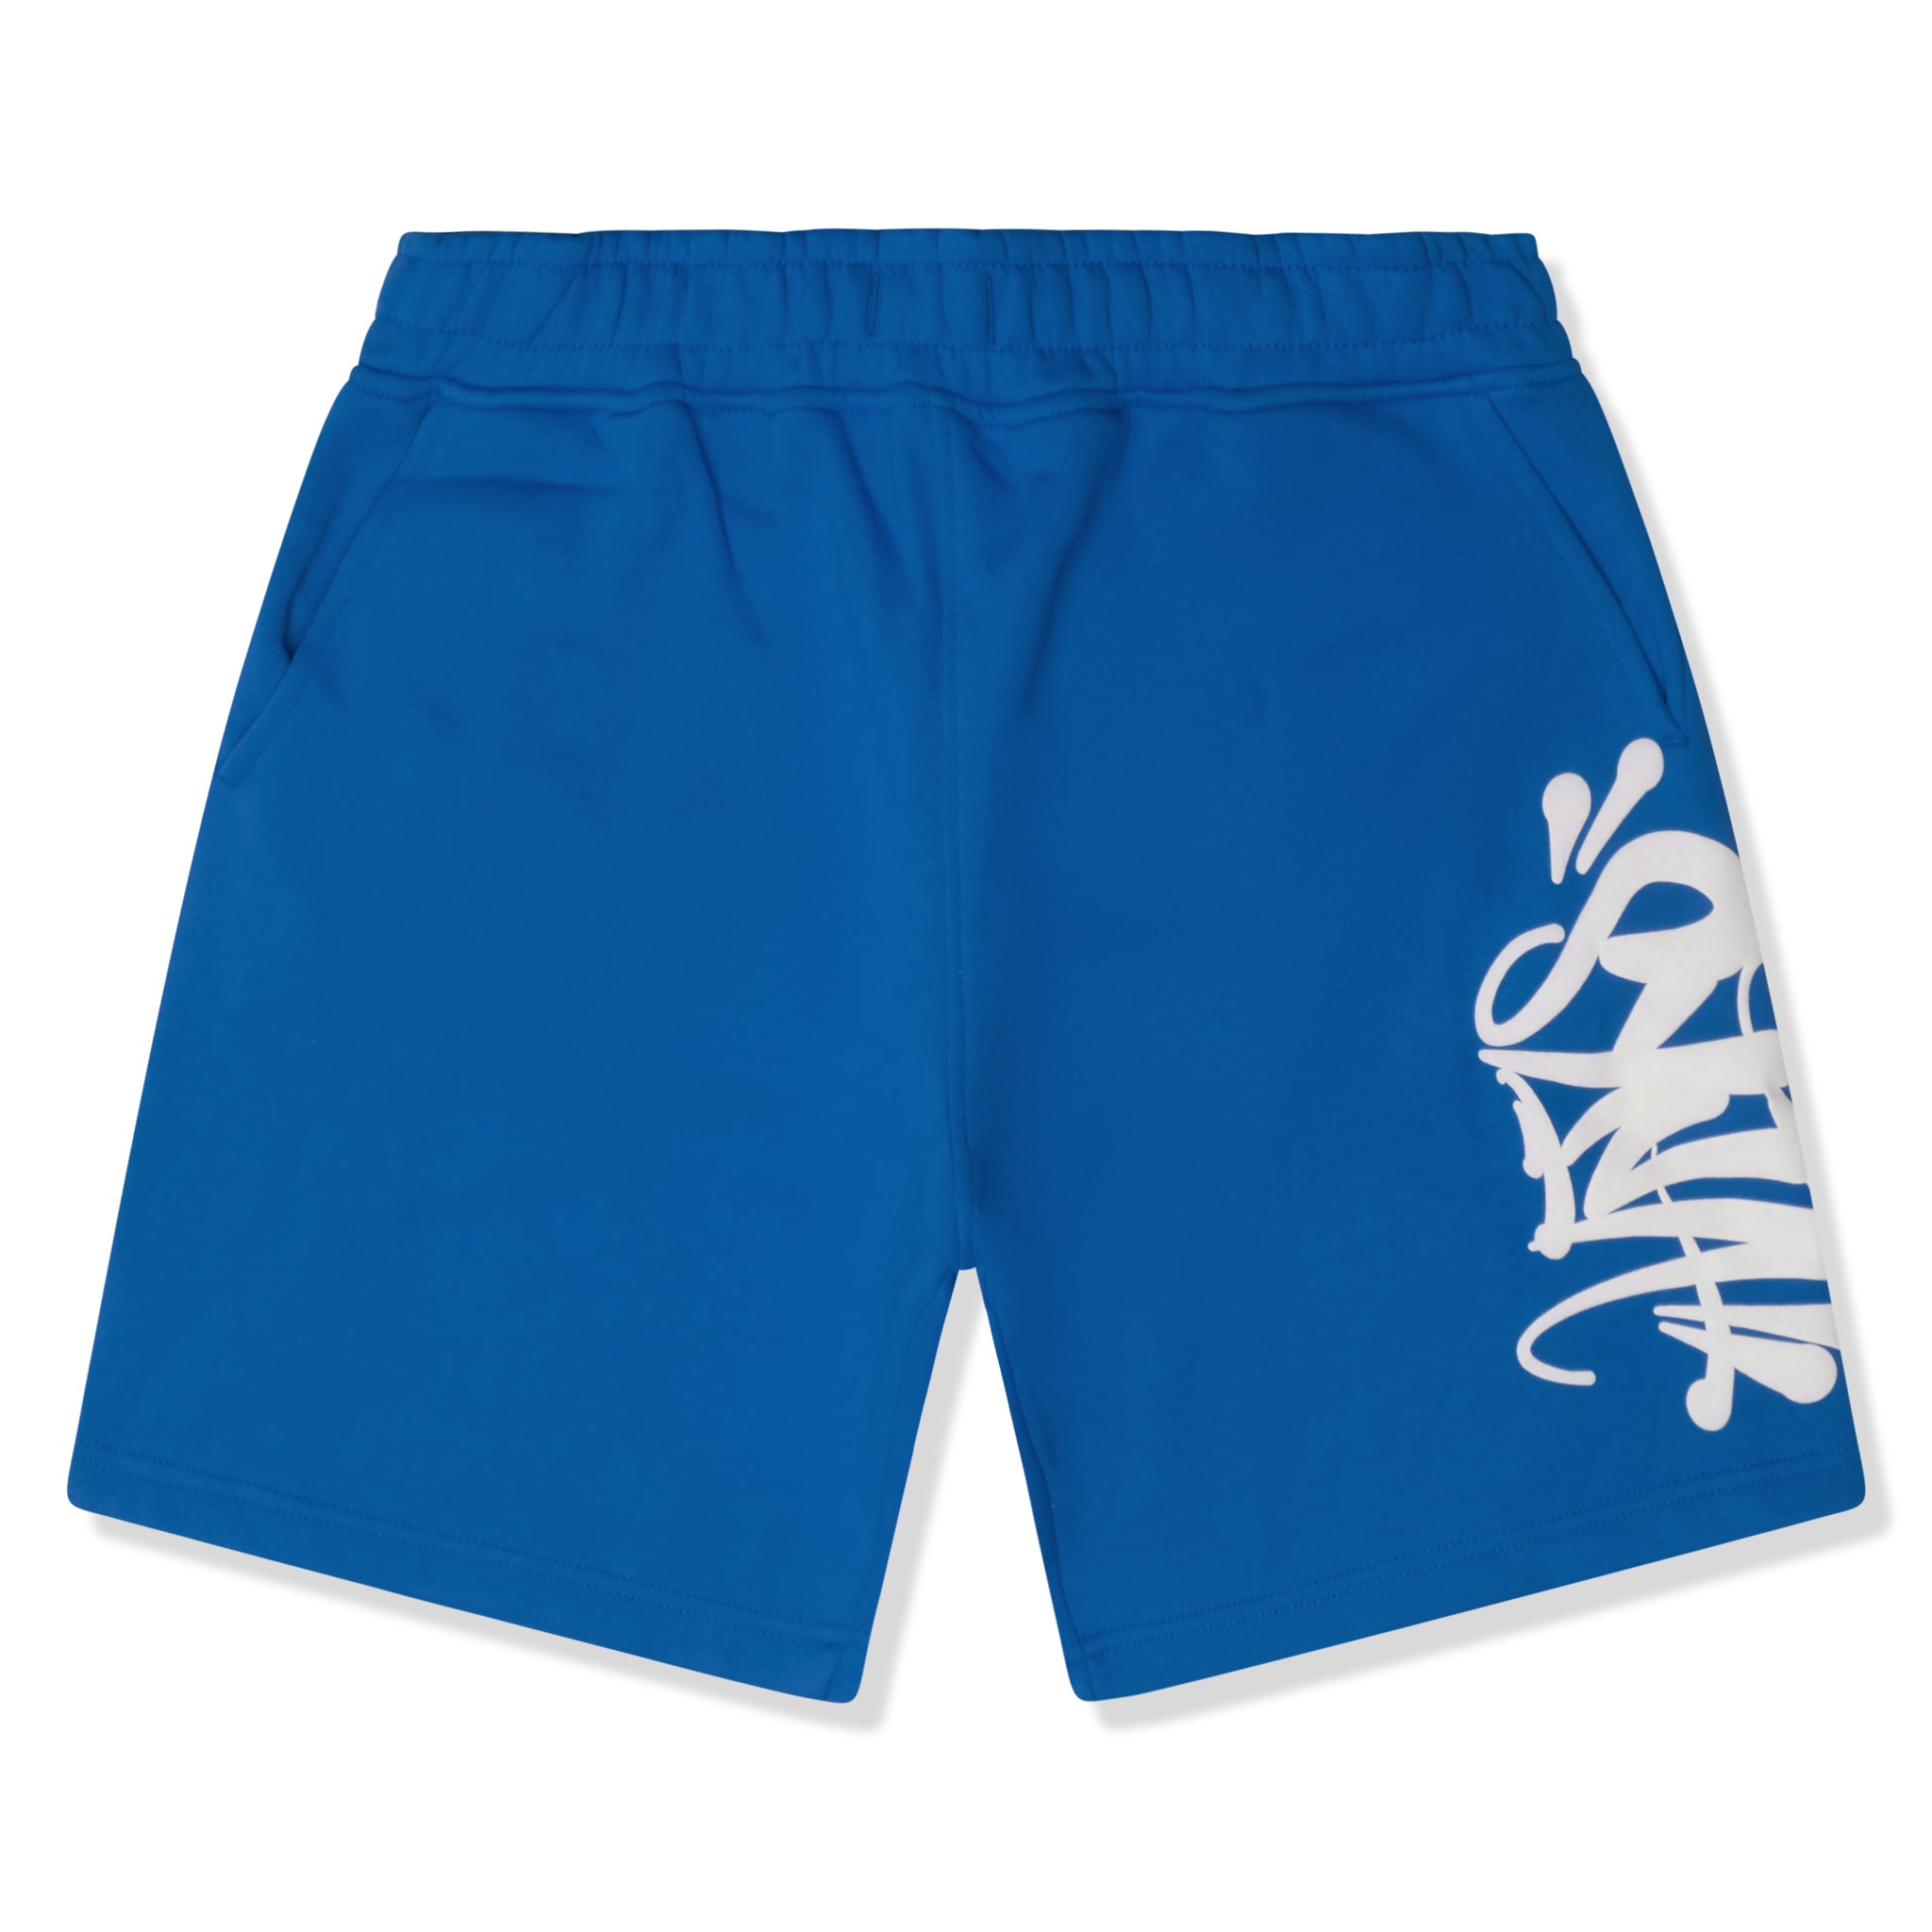 Front view of Syna World Team Syna Twinset Blue T-Shirt & Shorts TEAMSYNA-SHT-BLUE